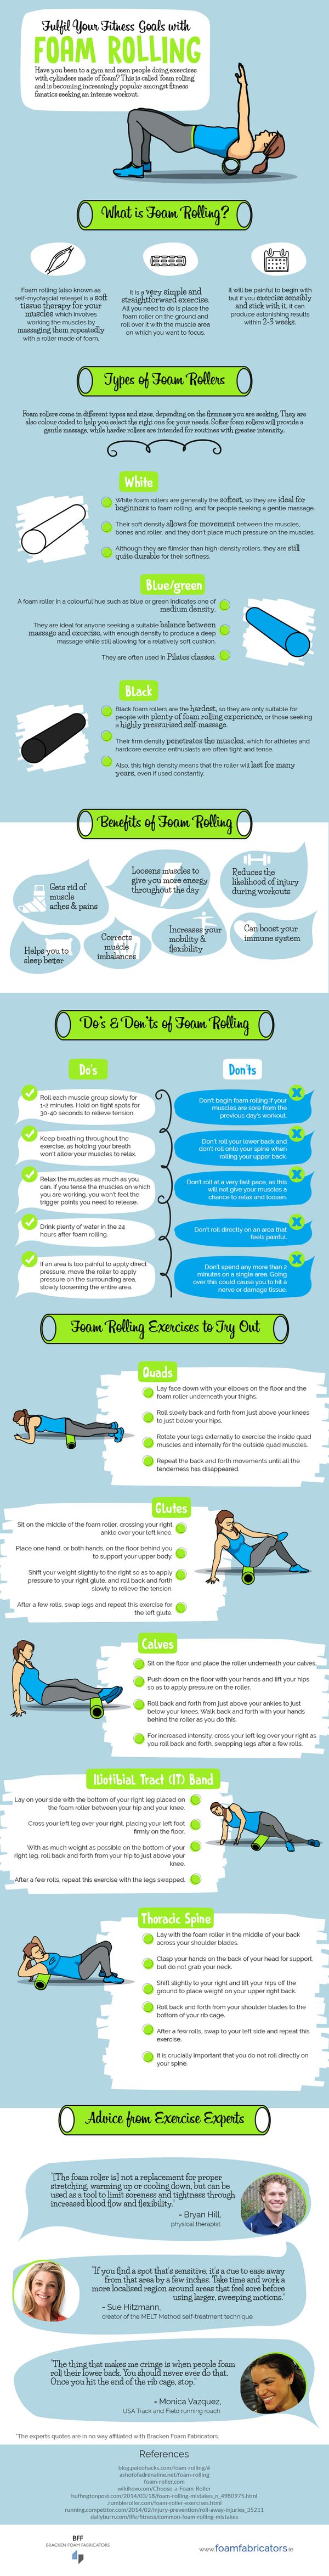 Fulfil Your Fitness Goals with Foam Rolling – Infographic